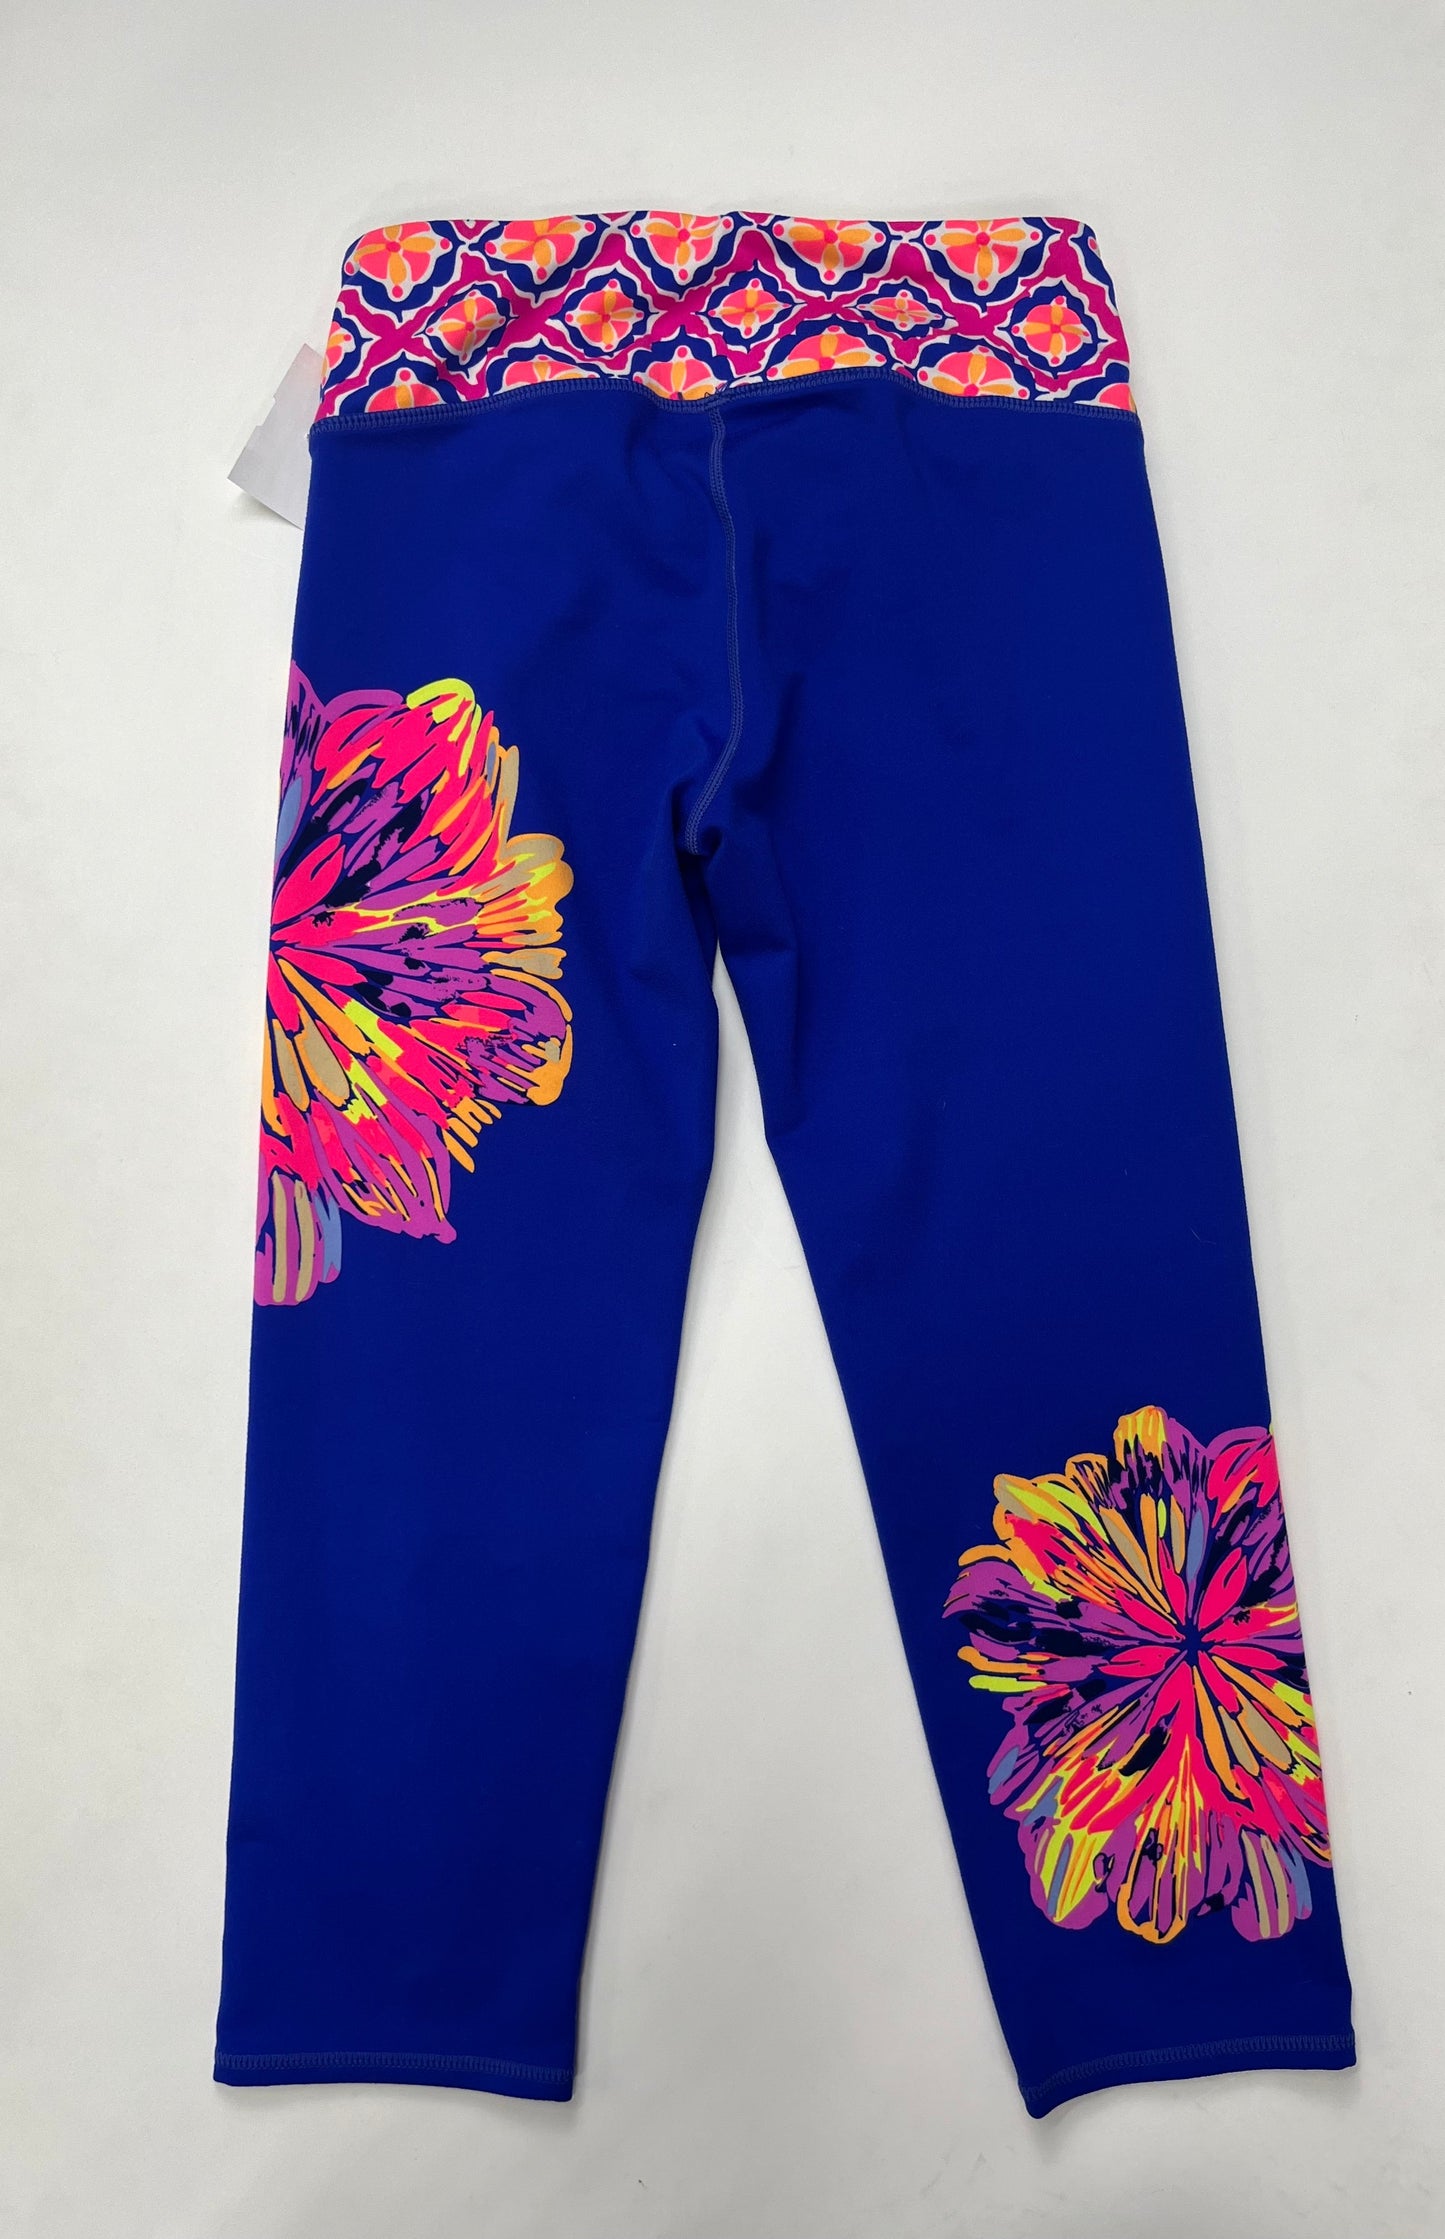 Multi Athletic Capris Lilly Pulitzer, Size S